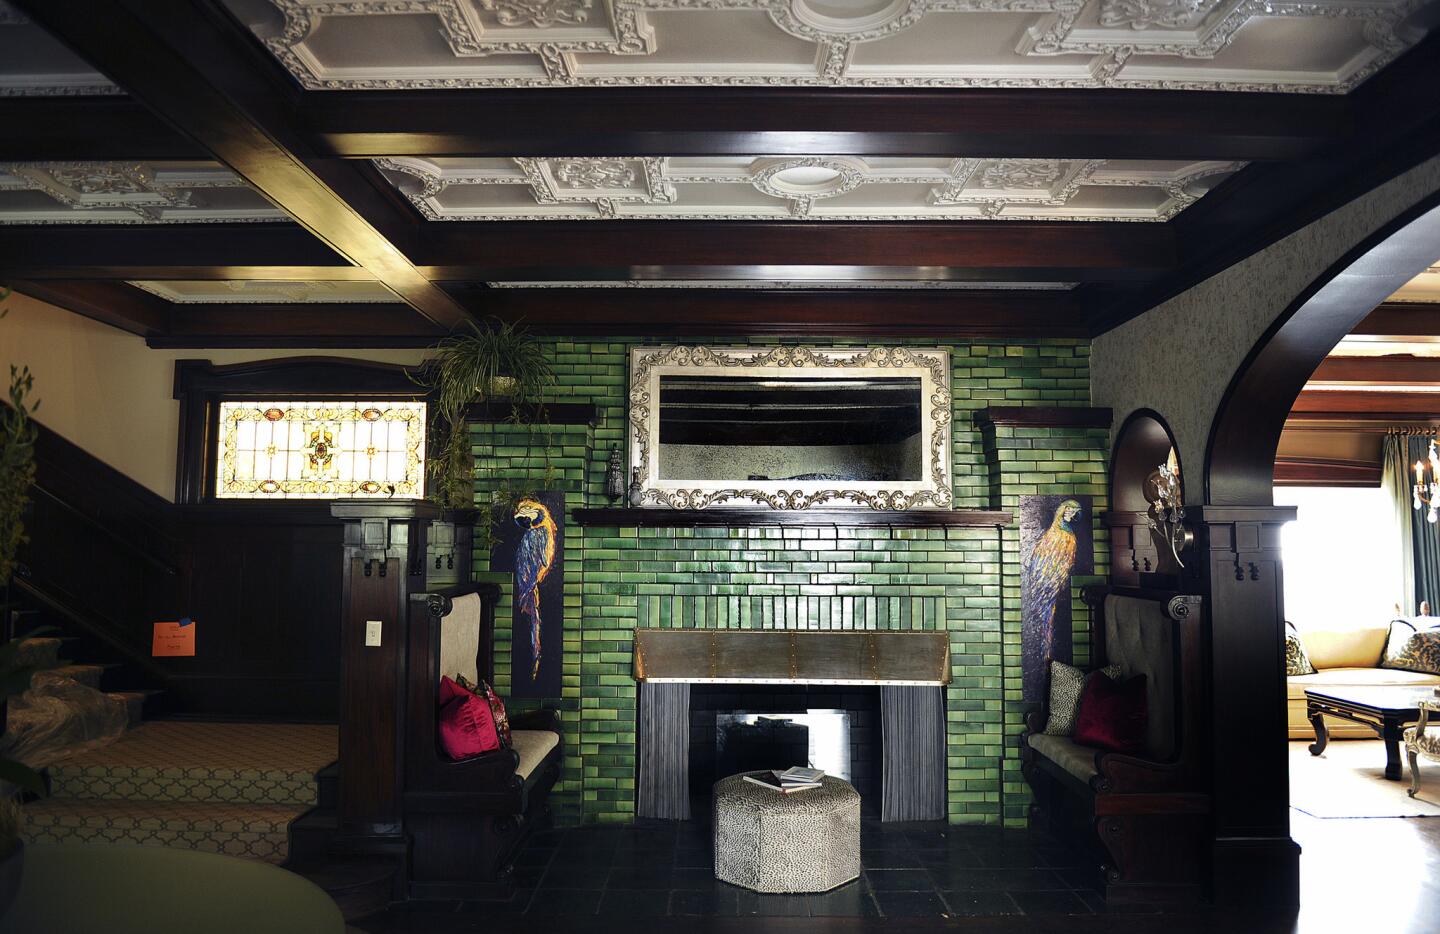 Visitors to the latest Pasadena Showcase House of Design will be greeted by a historic fireplace framed by emerald green Grueby tile, which is original to the house.